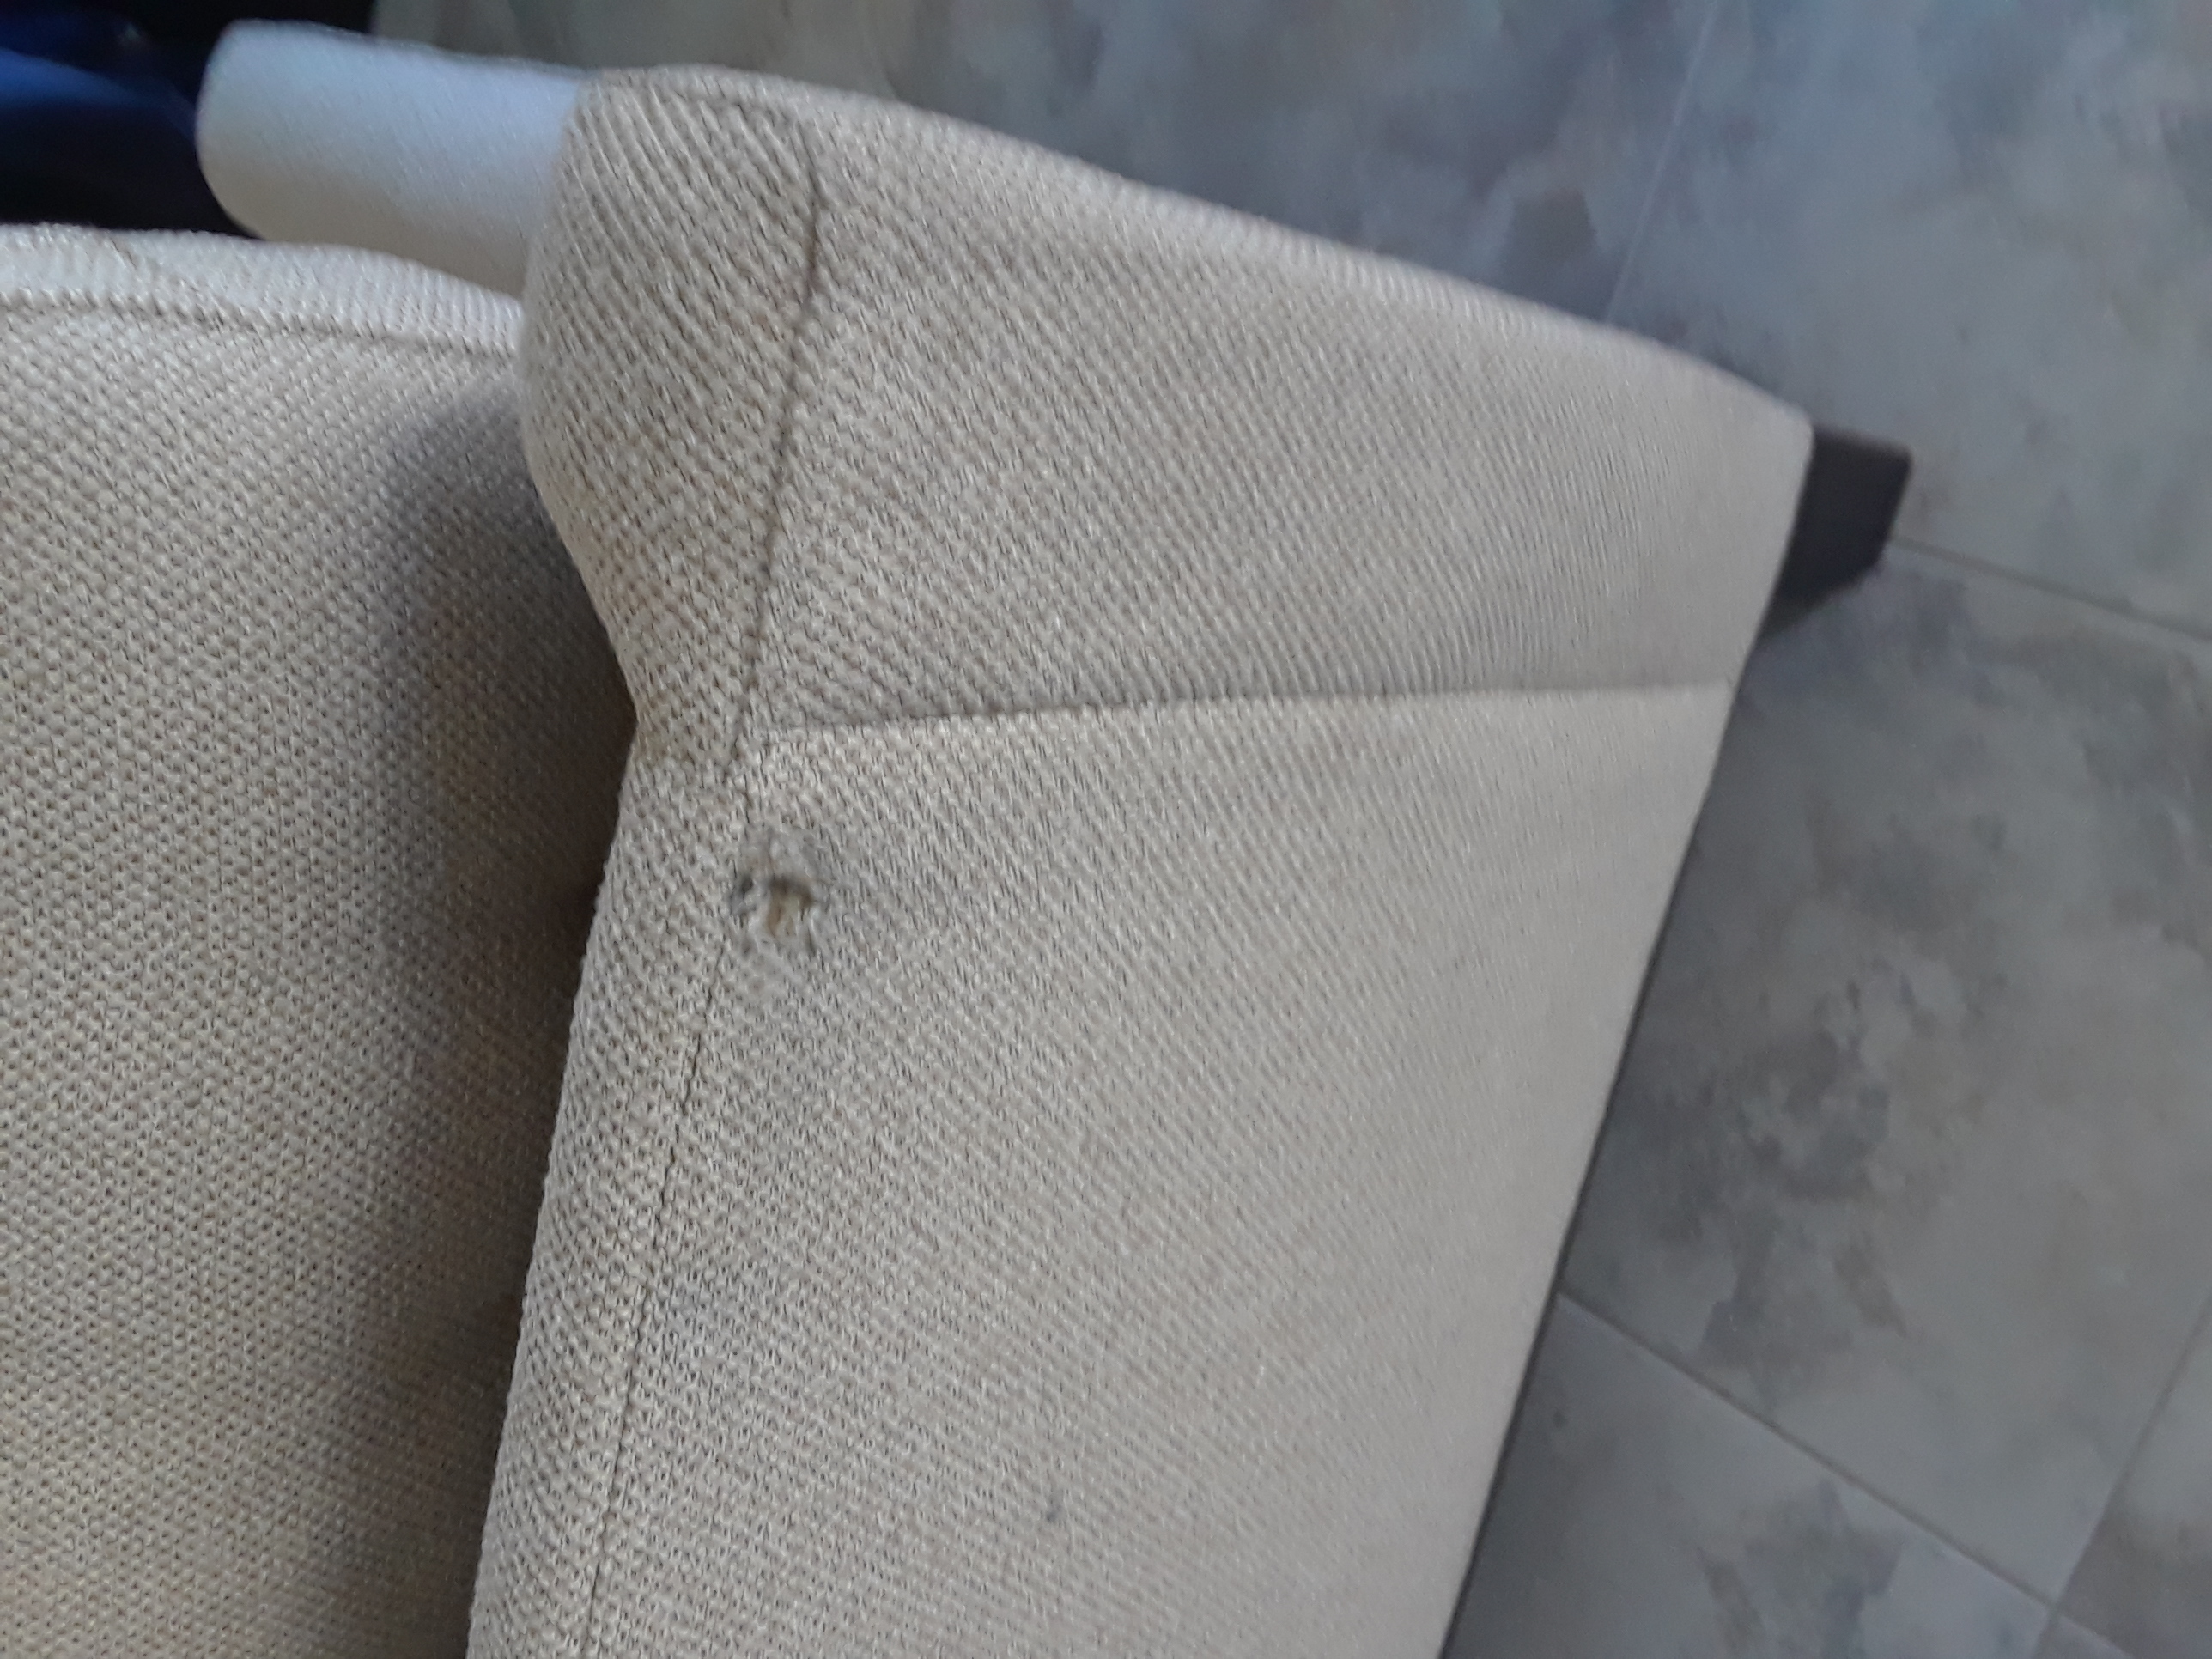 Close up of damage to couch